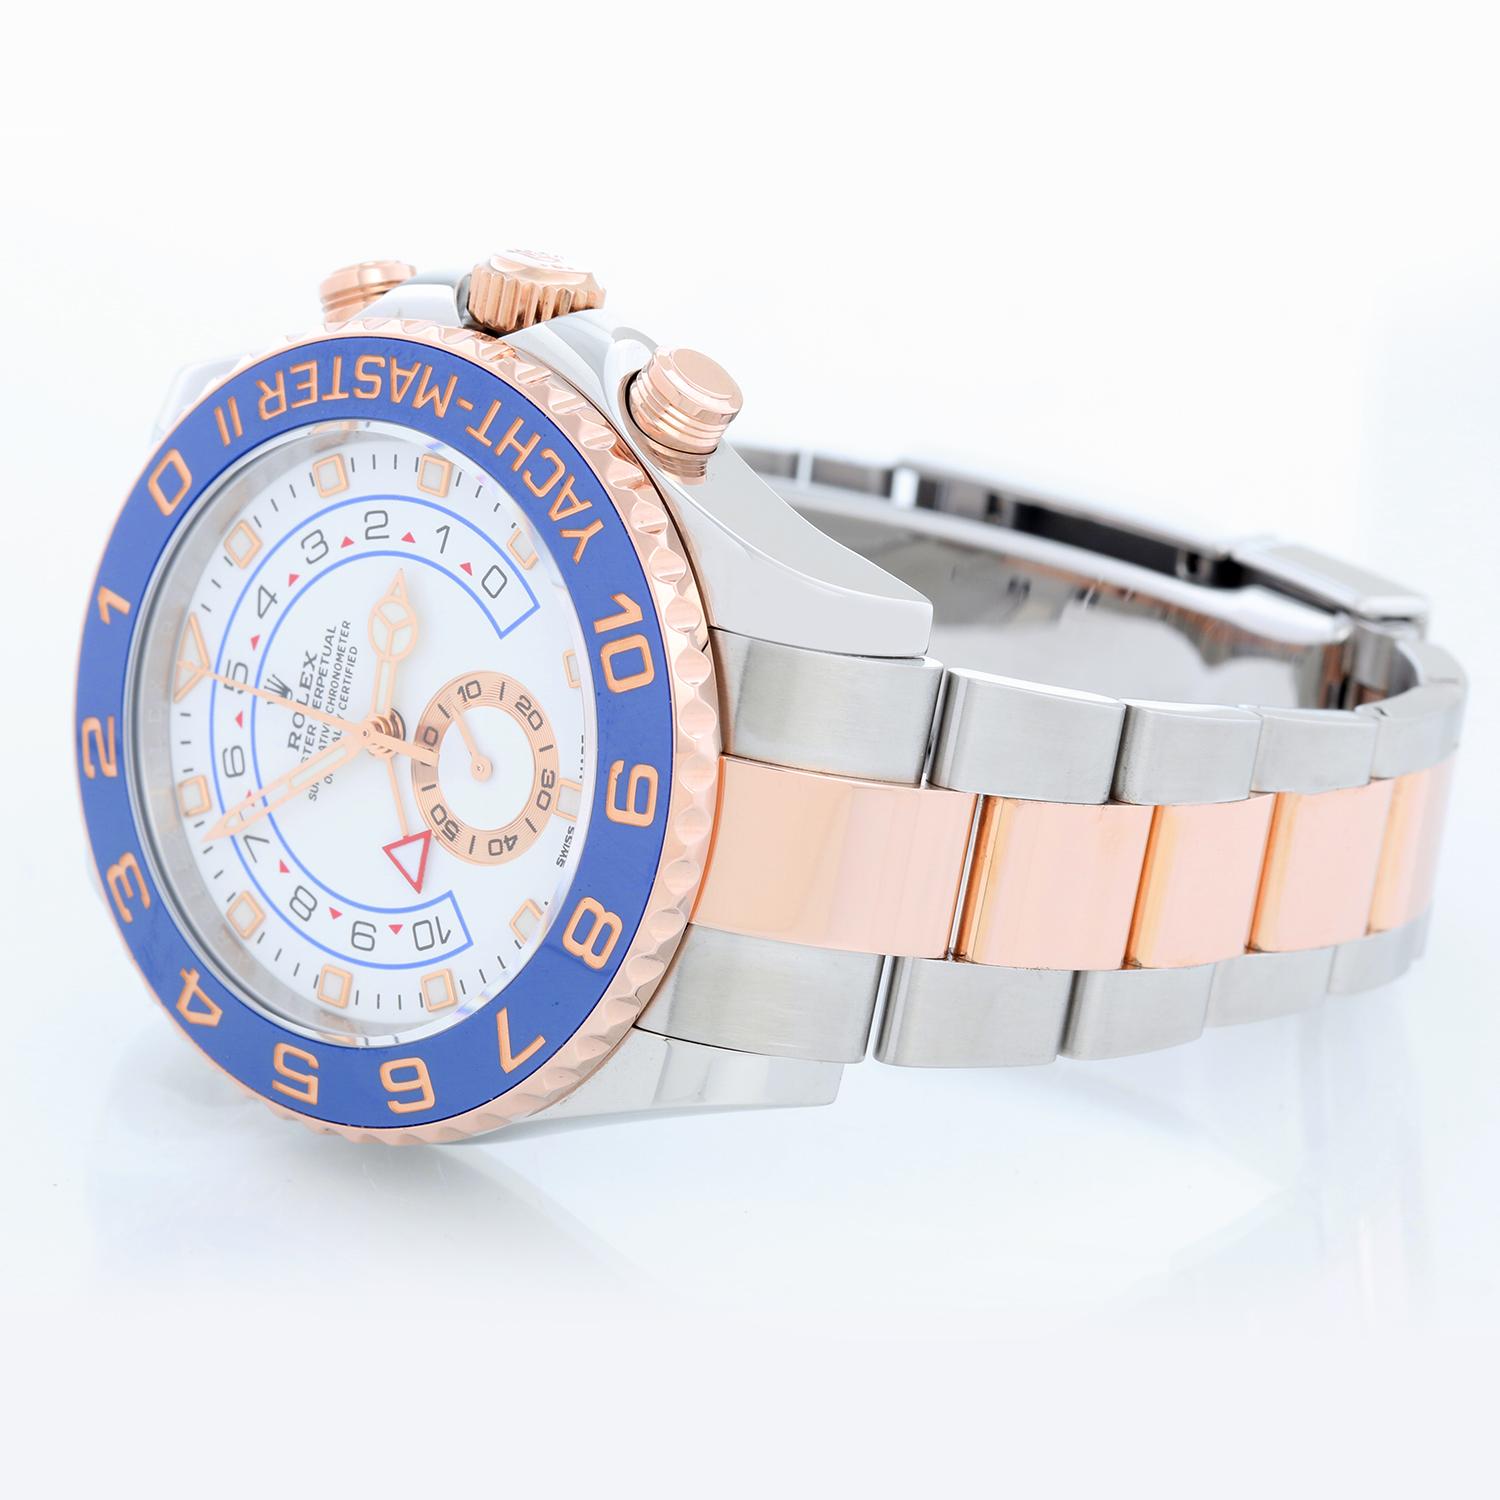 Men's Rolex Yacht-Master II Regatta Rose Gold Watch 116681 - Automatic winding, Regatta Chronograph, 31 jewels, sapphire crystal. Stainless steel case with rose gold bezel with blue insert (44mm diameter). White dial with luminous markers; gold